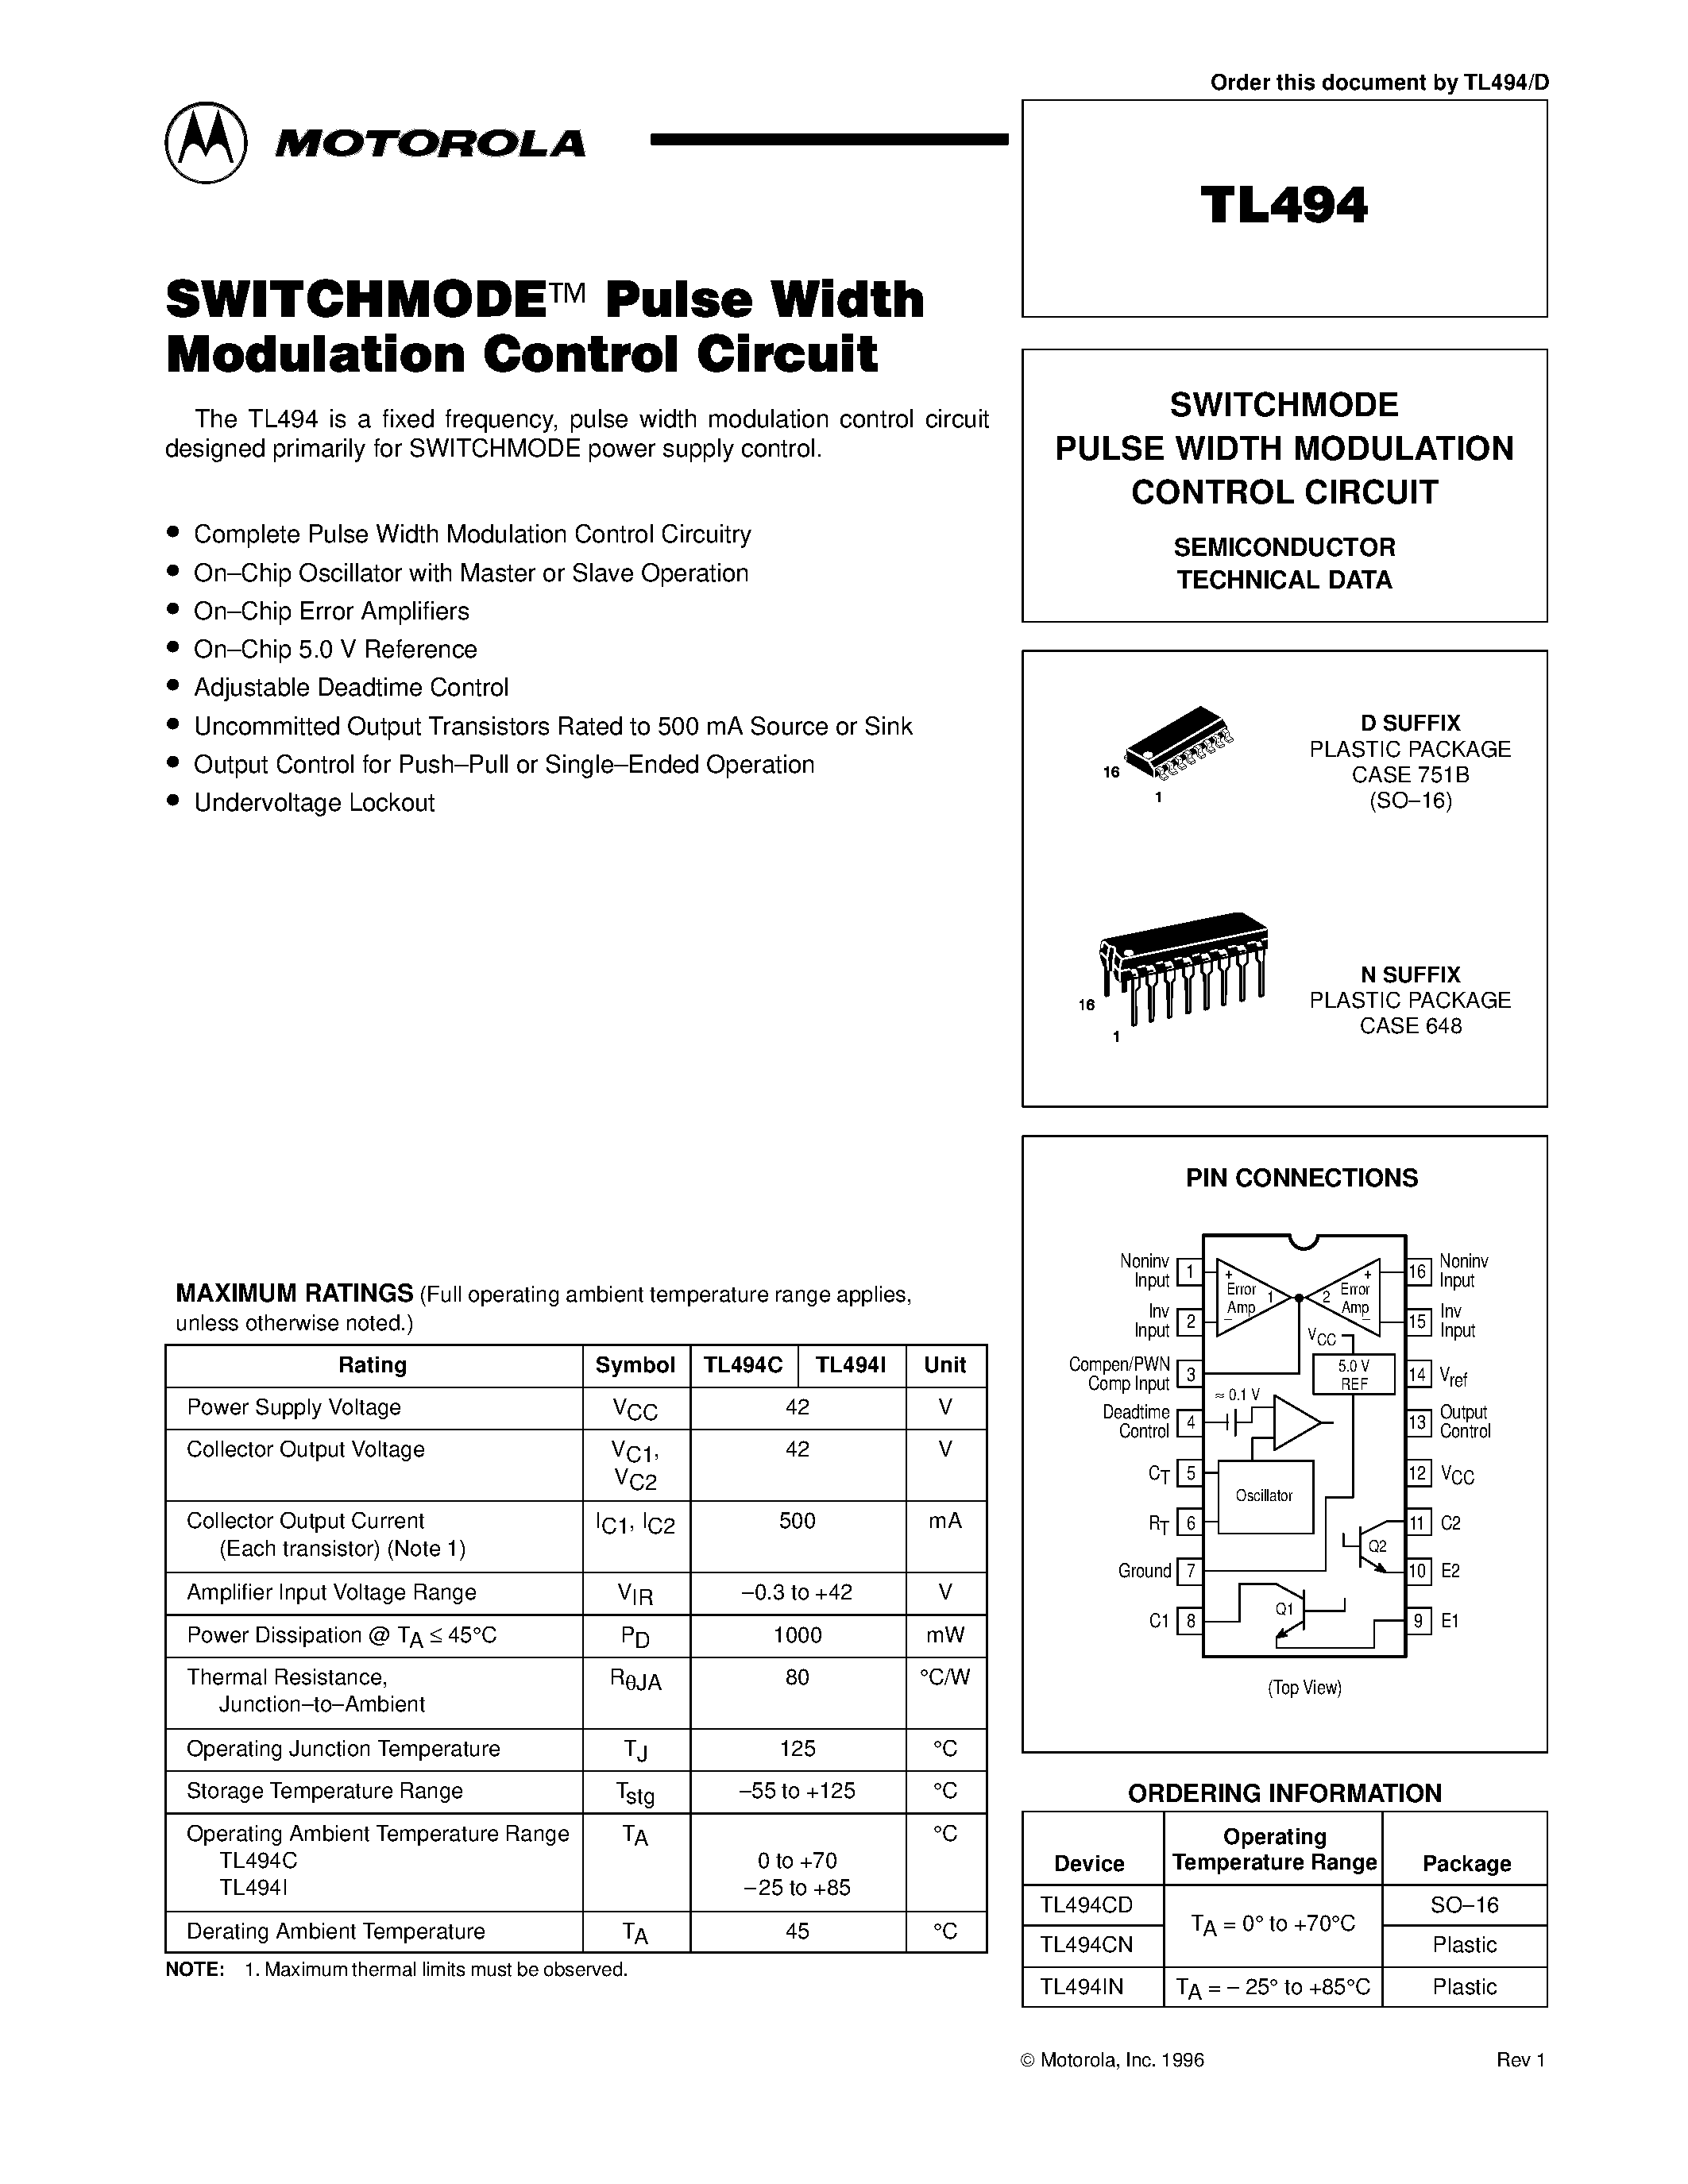 Datasheet TL494IN - SWITCHMODE PULSE WIDTH MODULATION CONTROL CIRCUIT page 1